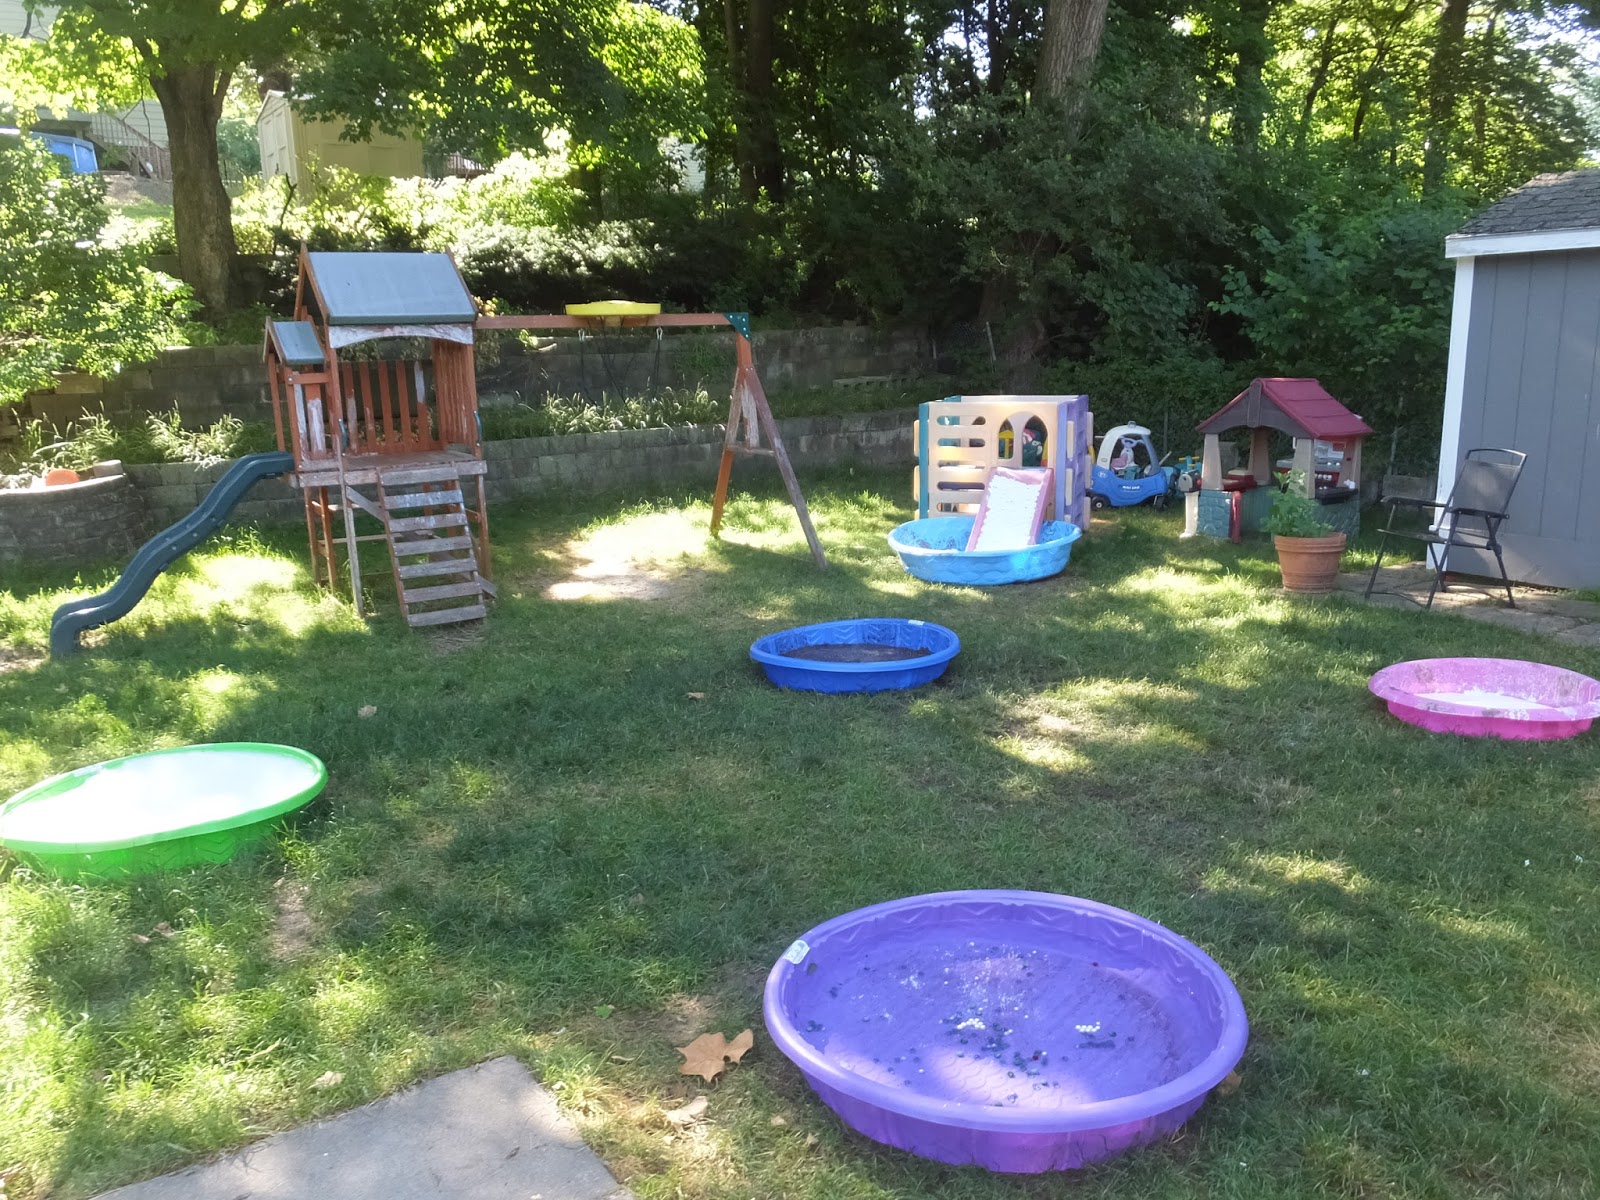 Kidspert Create An Obstacle Course In Your Backyard With Kiddie Pools